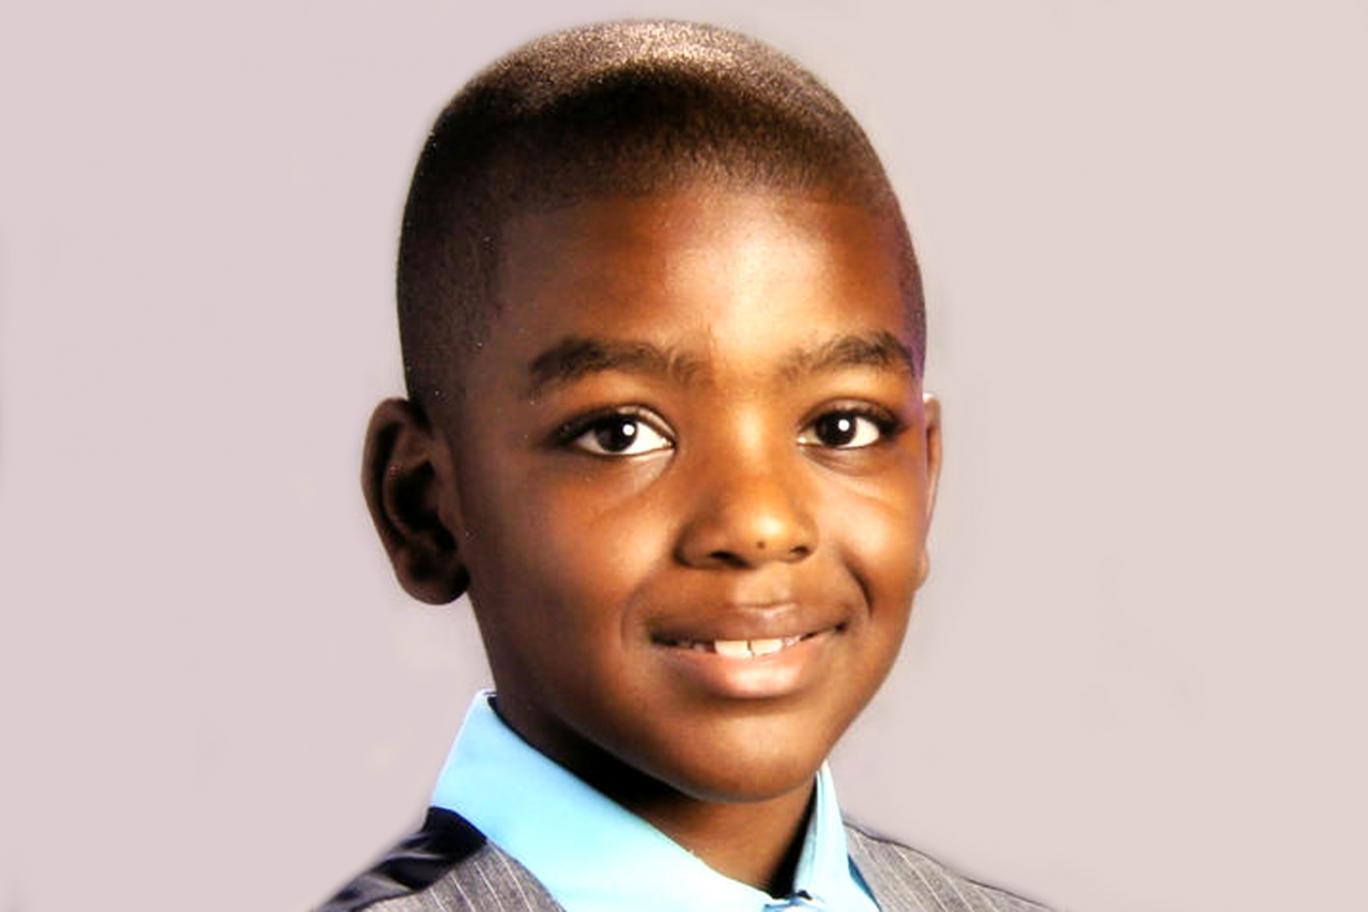 Chicago: An Arrest Has Been Made In The Fatal Shooting Of 9- Year Old Tyshawn Lee